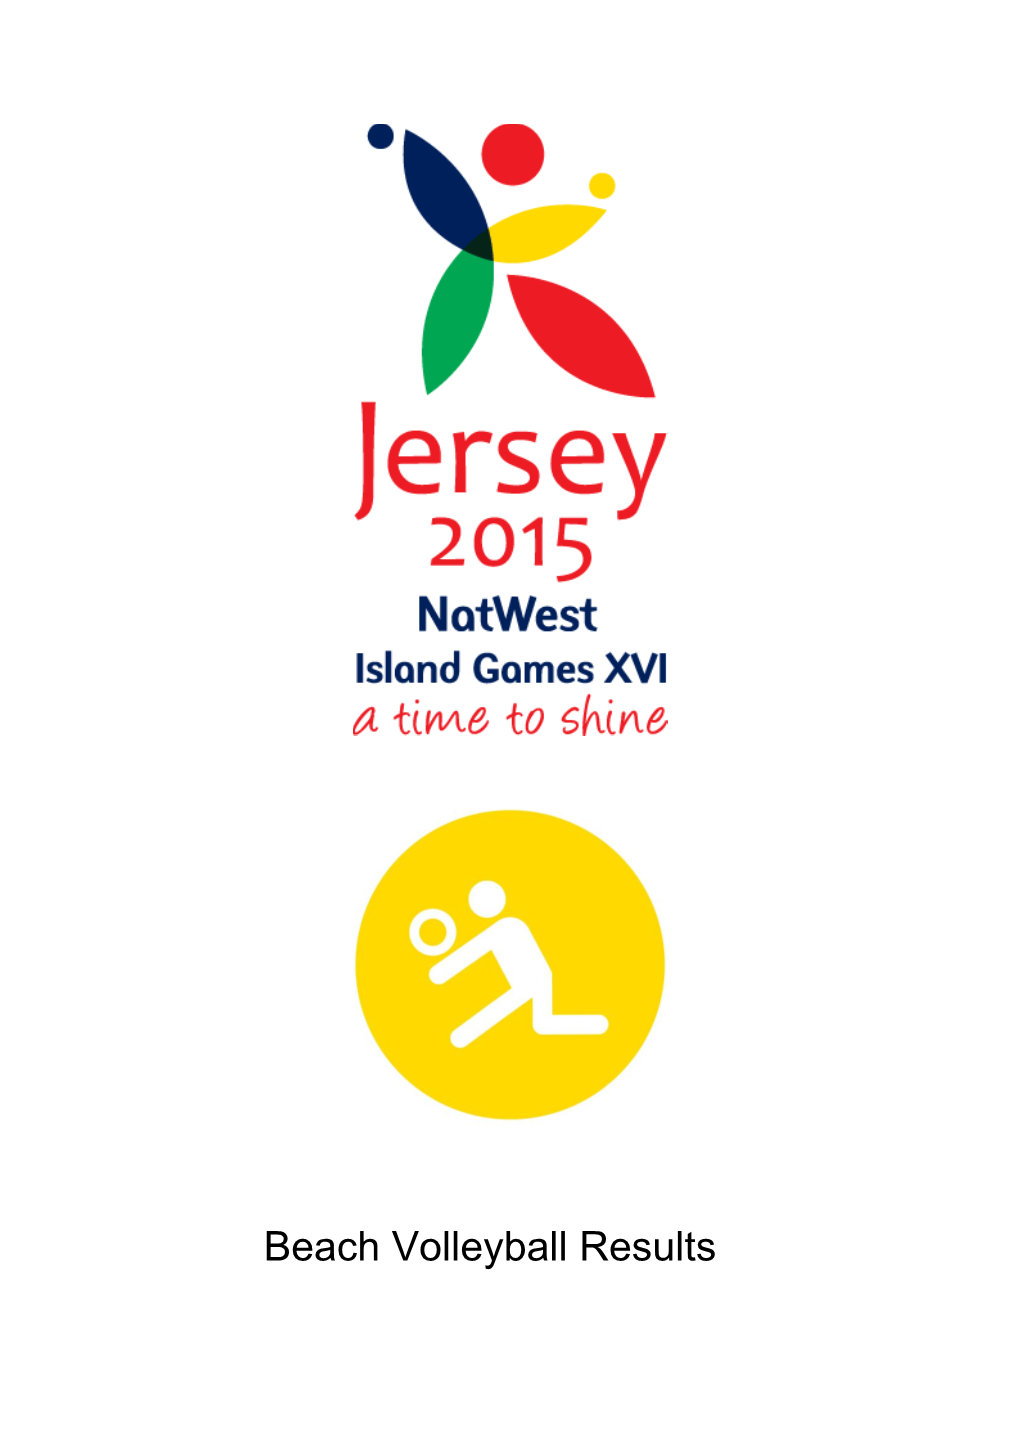 Beach Volleyball Results Natwest Island Games ‐ Jersey 2015